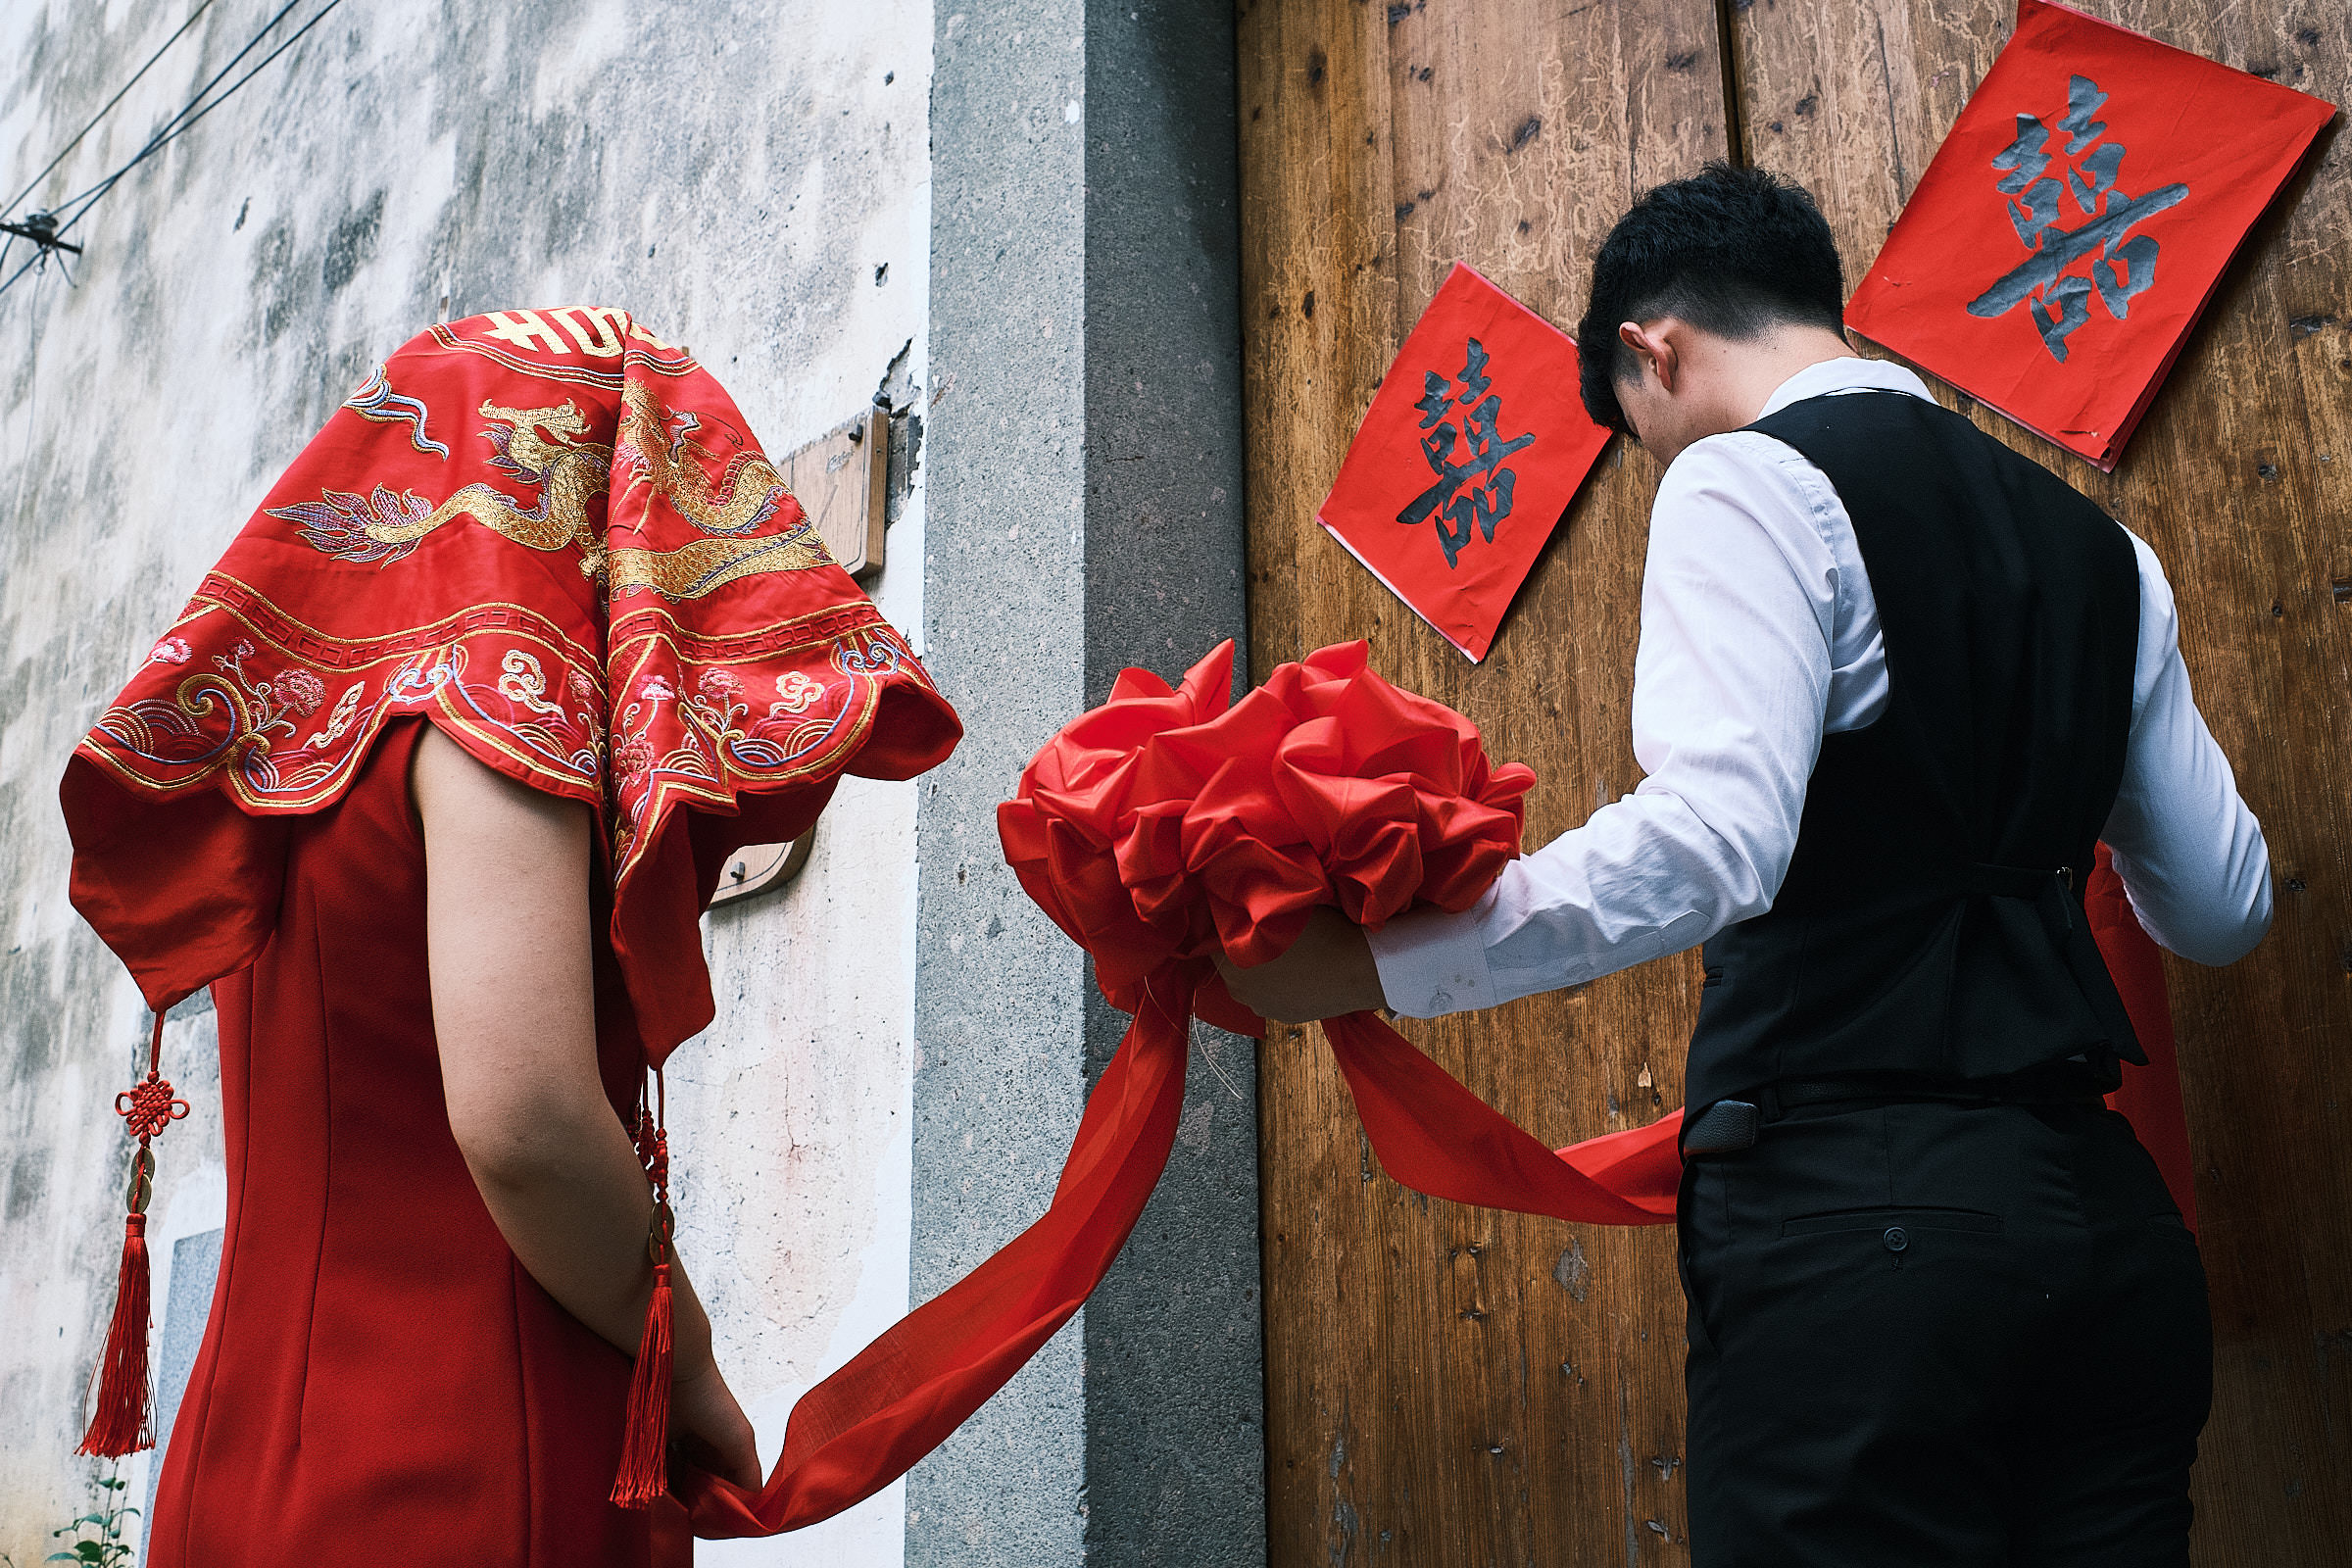 The Bride Dressed In Red And Her Brotber Stand Next To The Entrance Of Wedding Ceremony In China